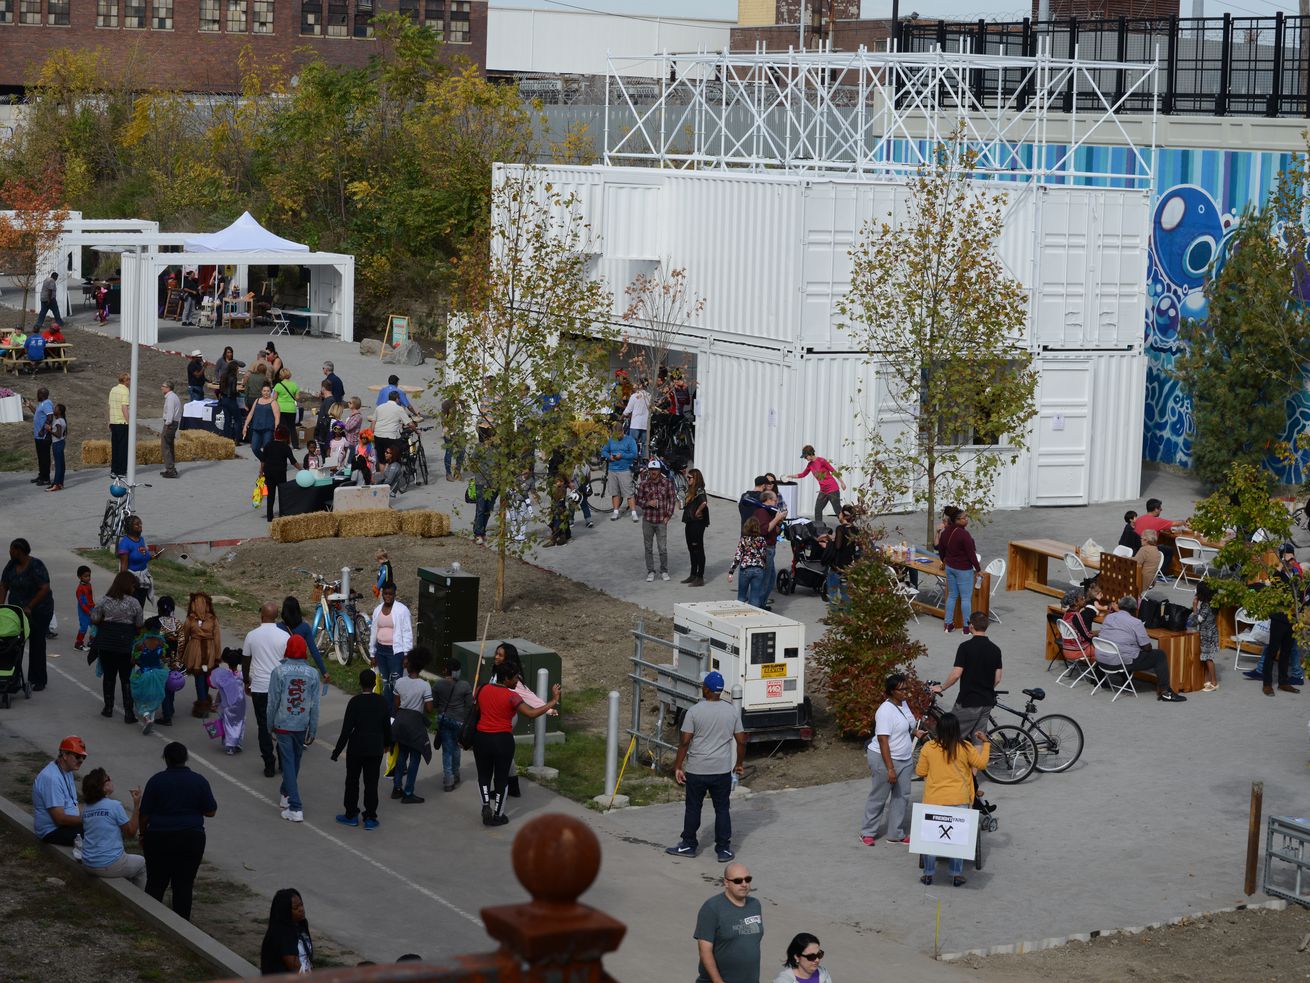 The Dequindre Cut Freight Yard preview during last year’s Harvest Festival